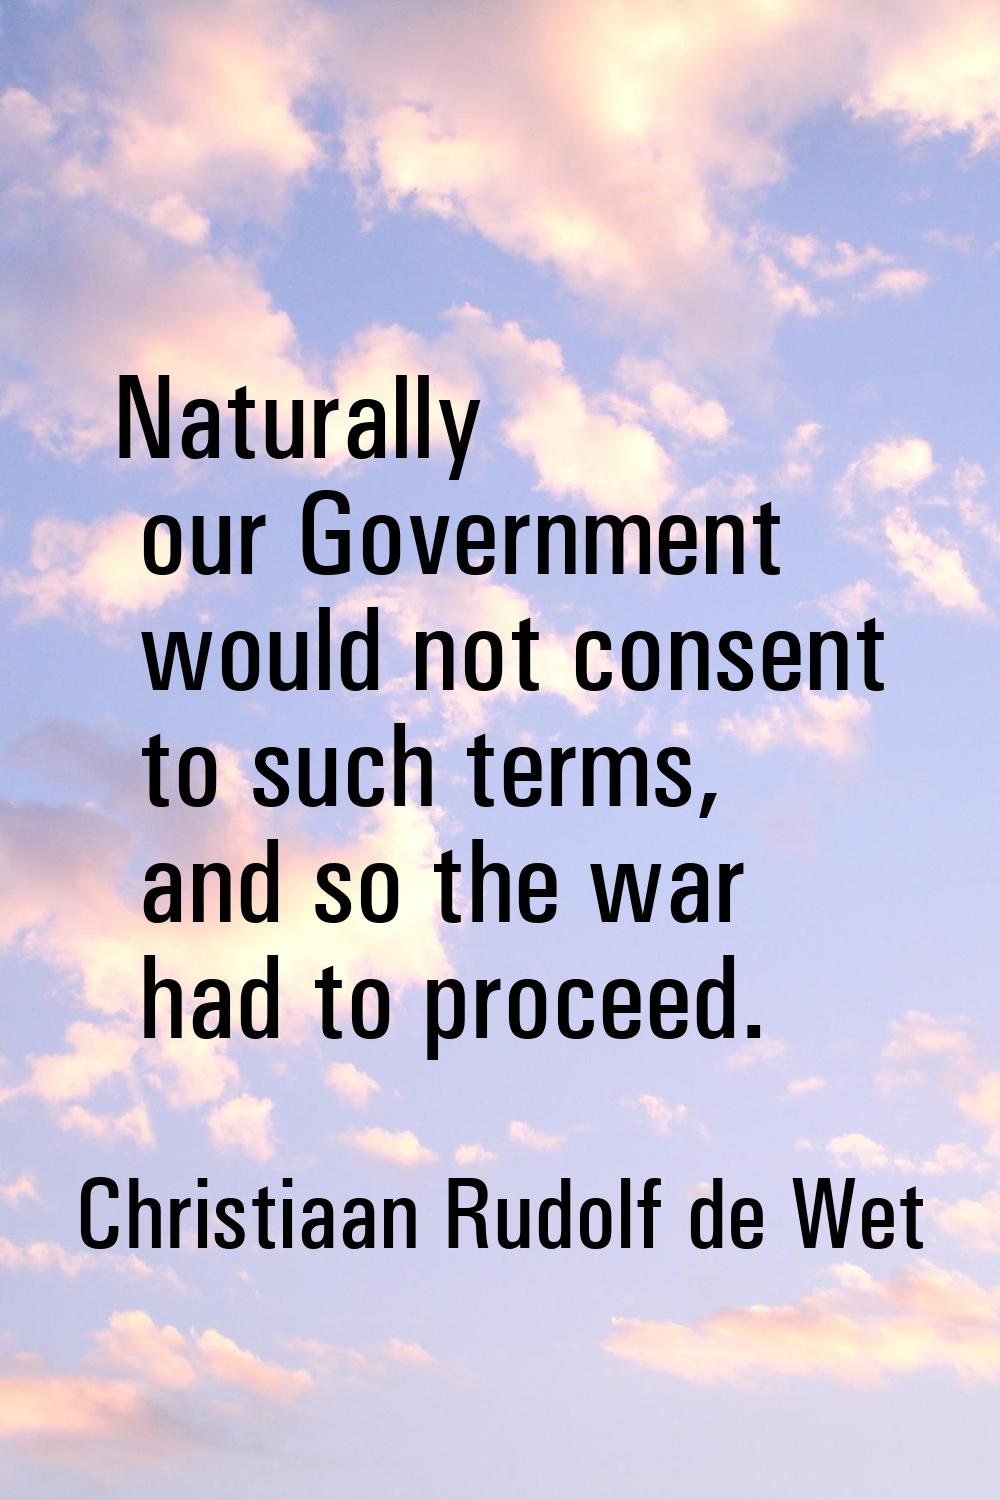 Naturally our Government would not consent to such terms, and so the war had to proceed.